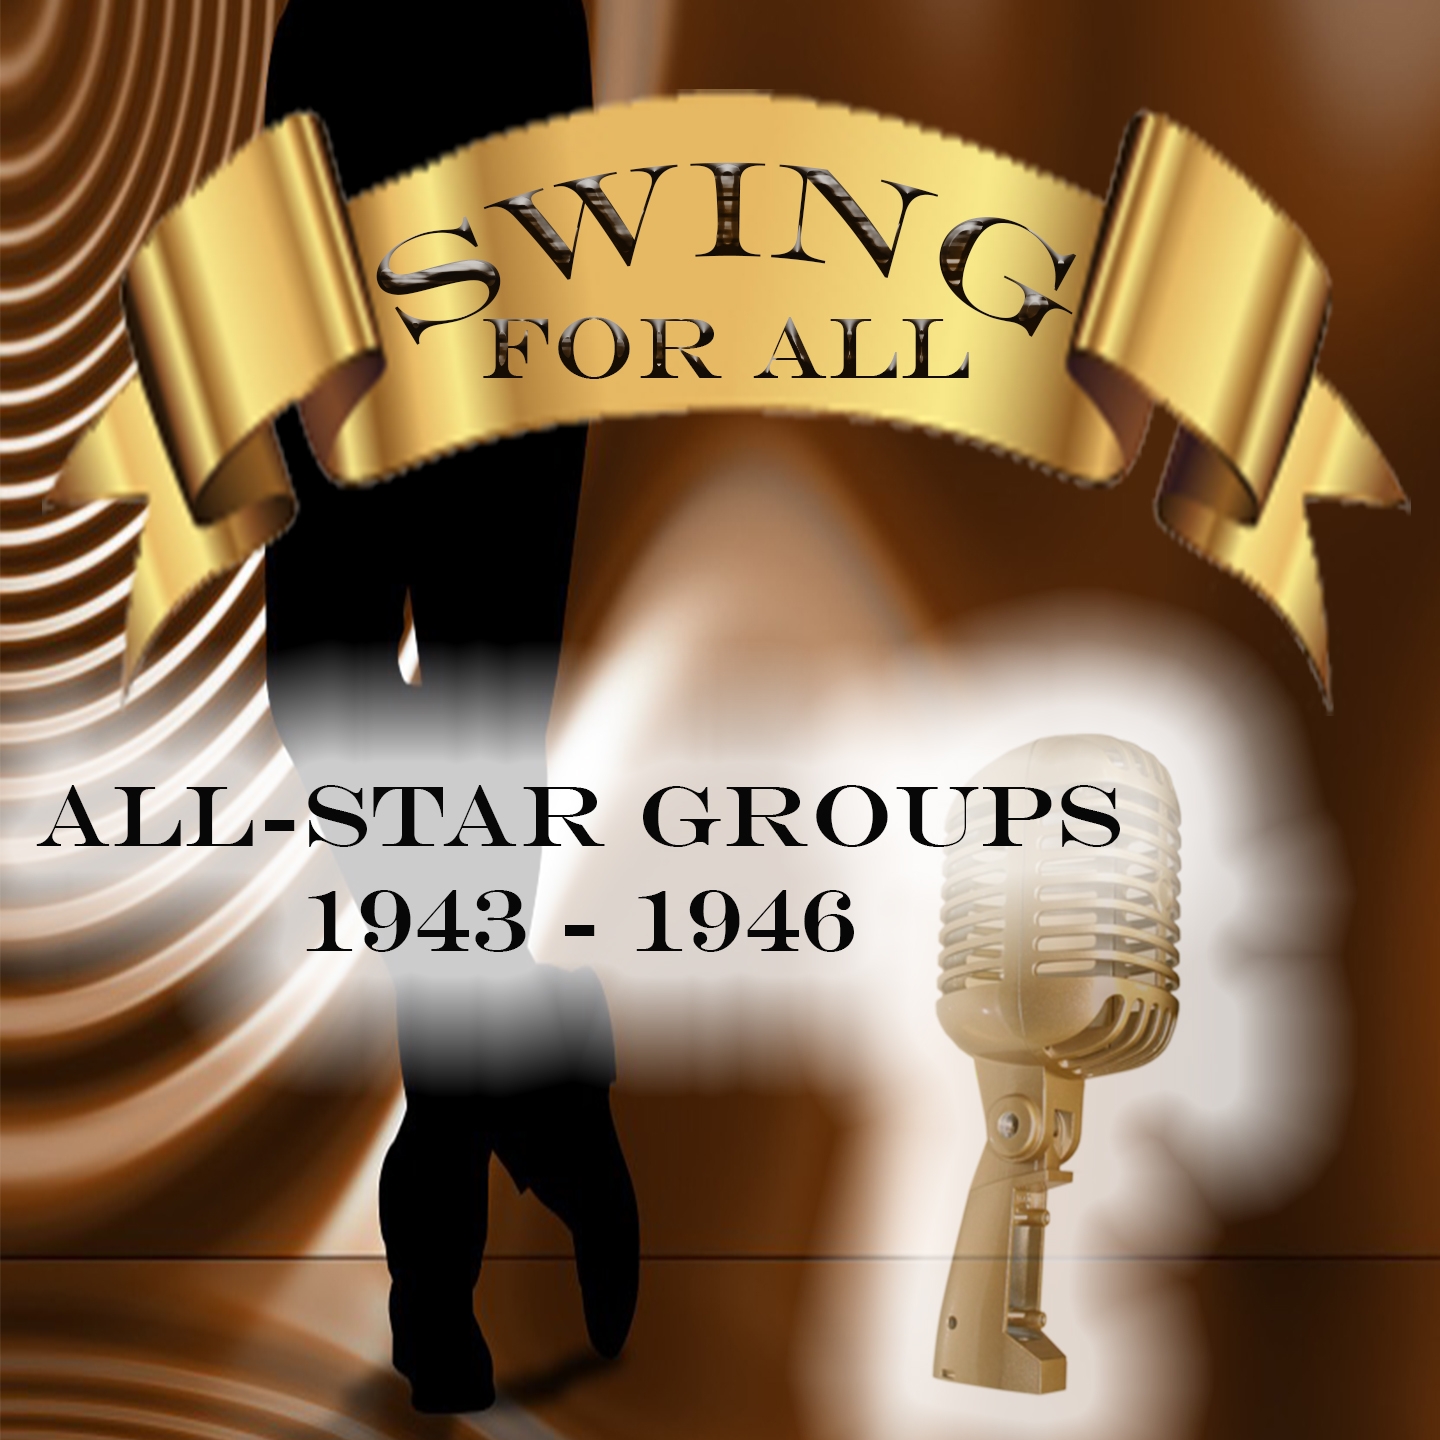 Swing for All, All-Star Groups 1943 - 1946